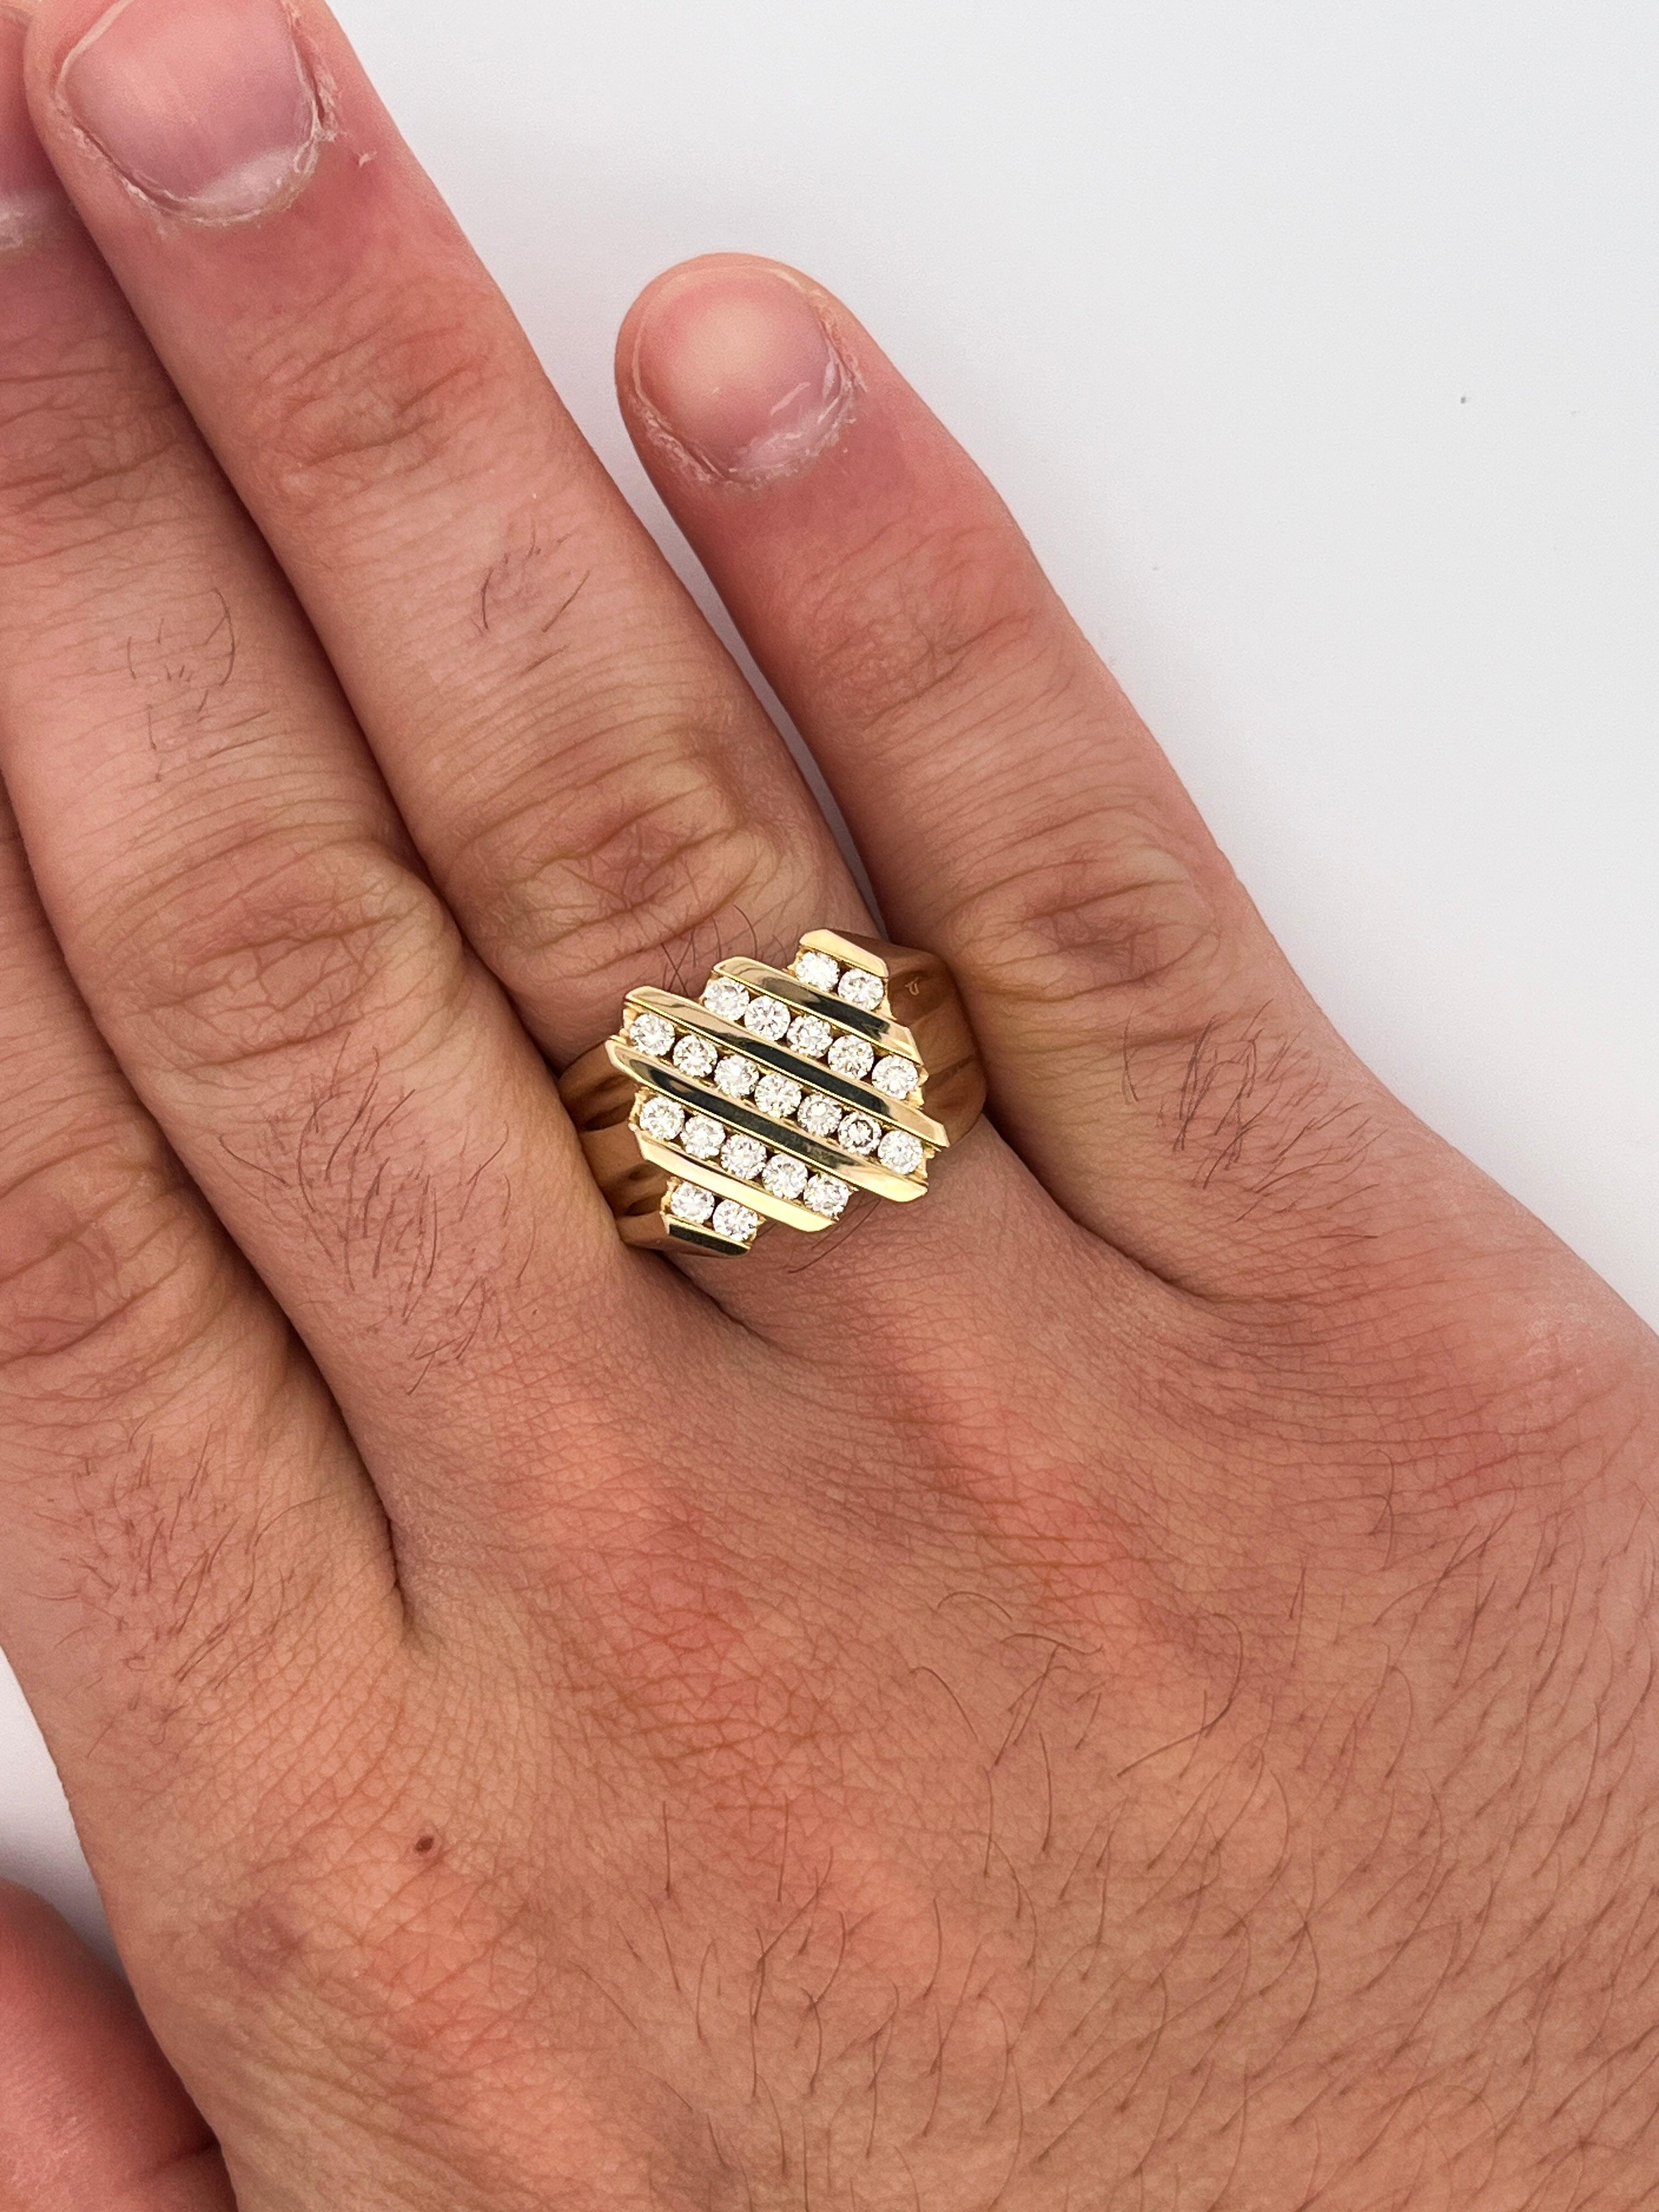 Natural diamond men's ring, set in a stunning textured and curved pattern 14k solid yellow gold. Fixed with a flat face that sits beautifully on the finger.

The diamonds are excellent quality. Superbly white and eye-clean. Expertly channel set in 5